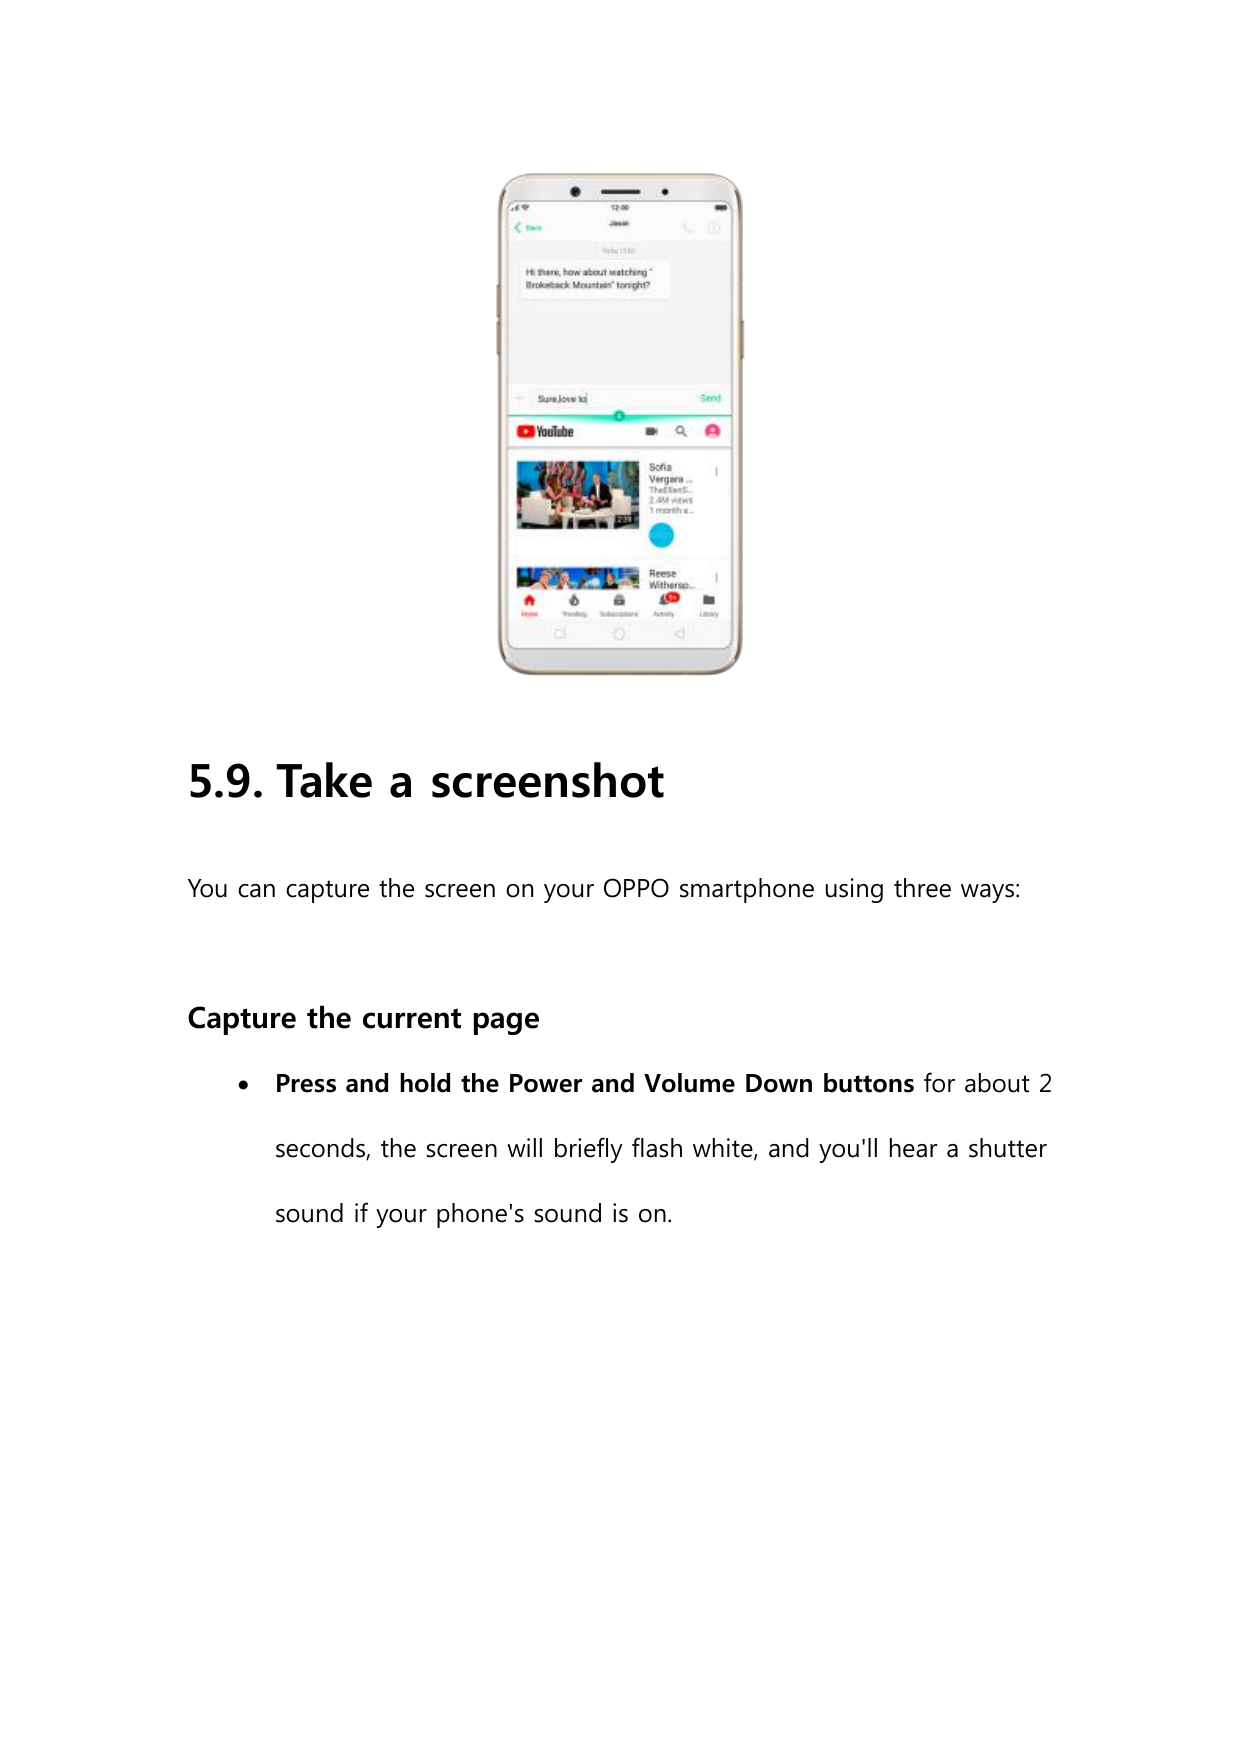 5.9. Take a screenshotYou can capture the screen on your OPPO smartphone using three ways:Capture the current pagePress and hol